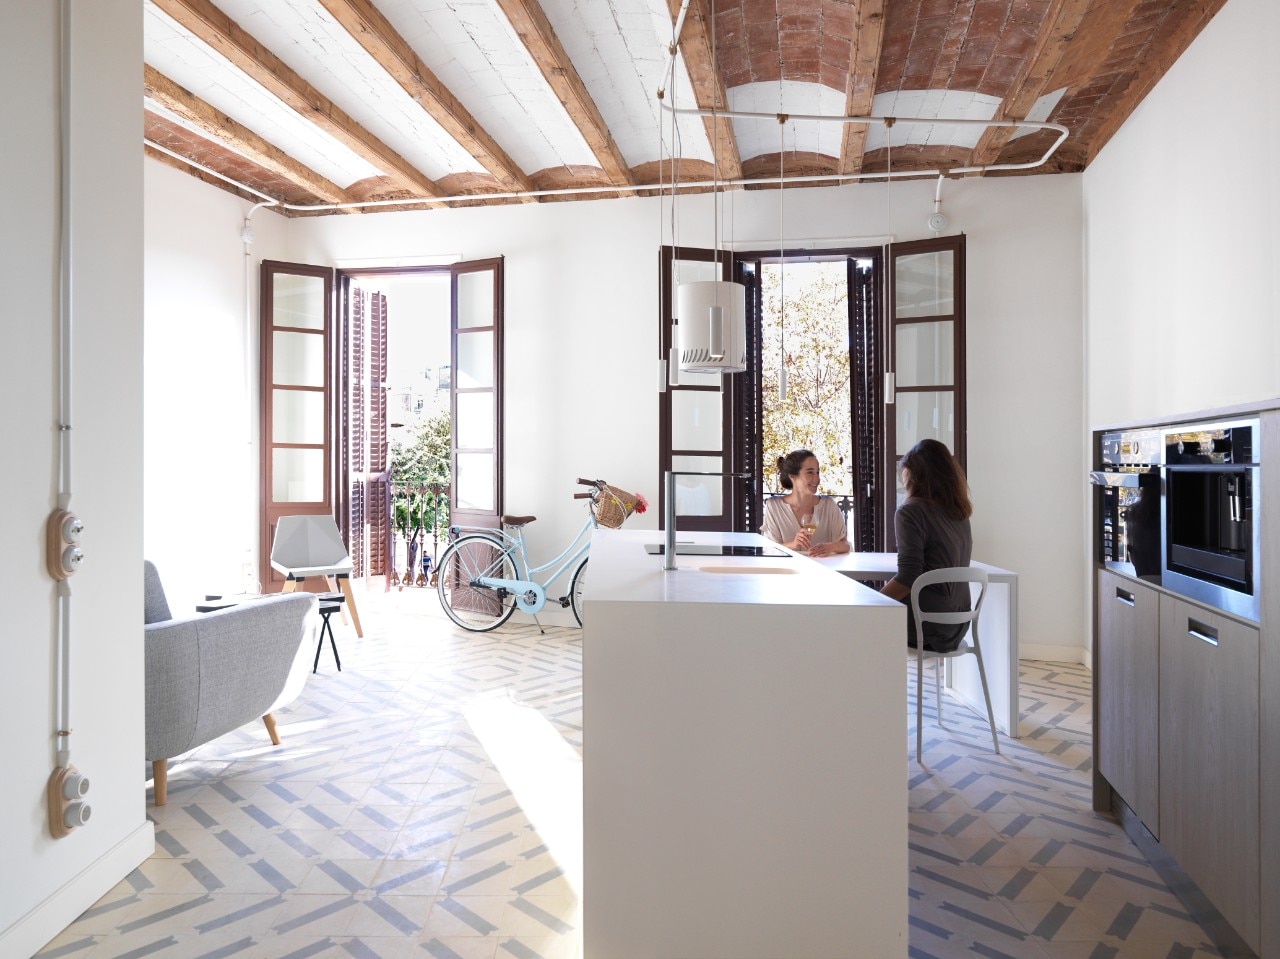 Cometa Architects renovate an old apartment in Barcelona using light